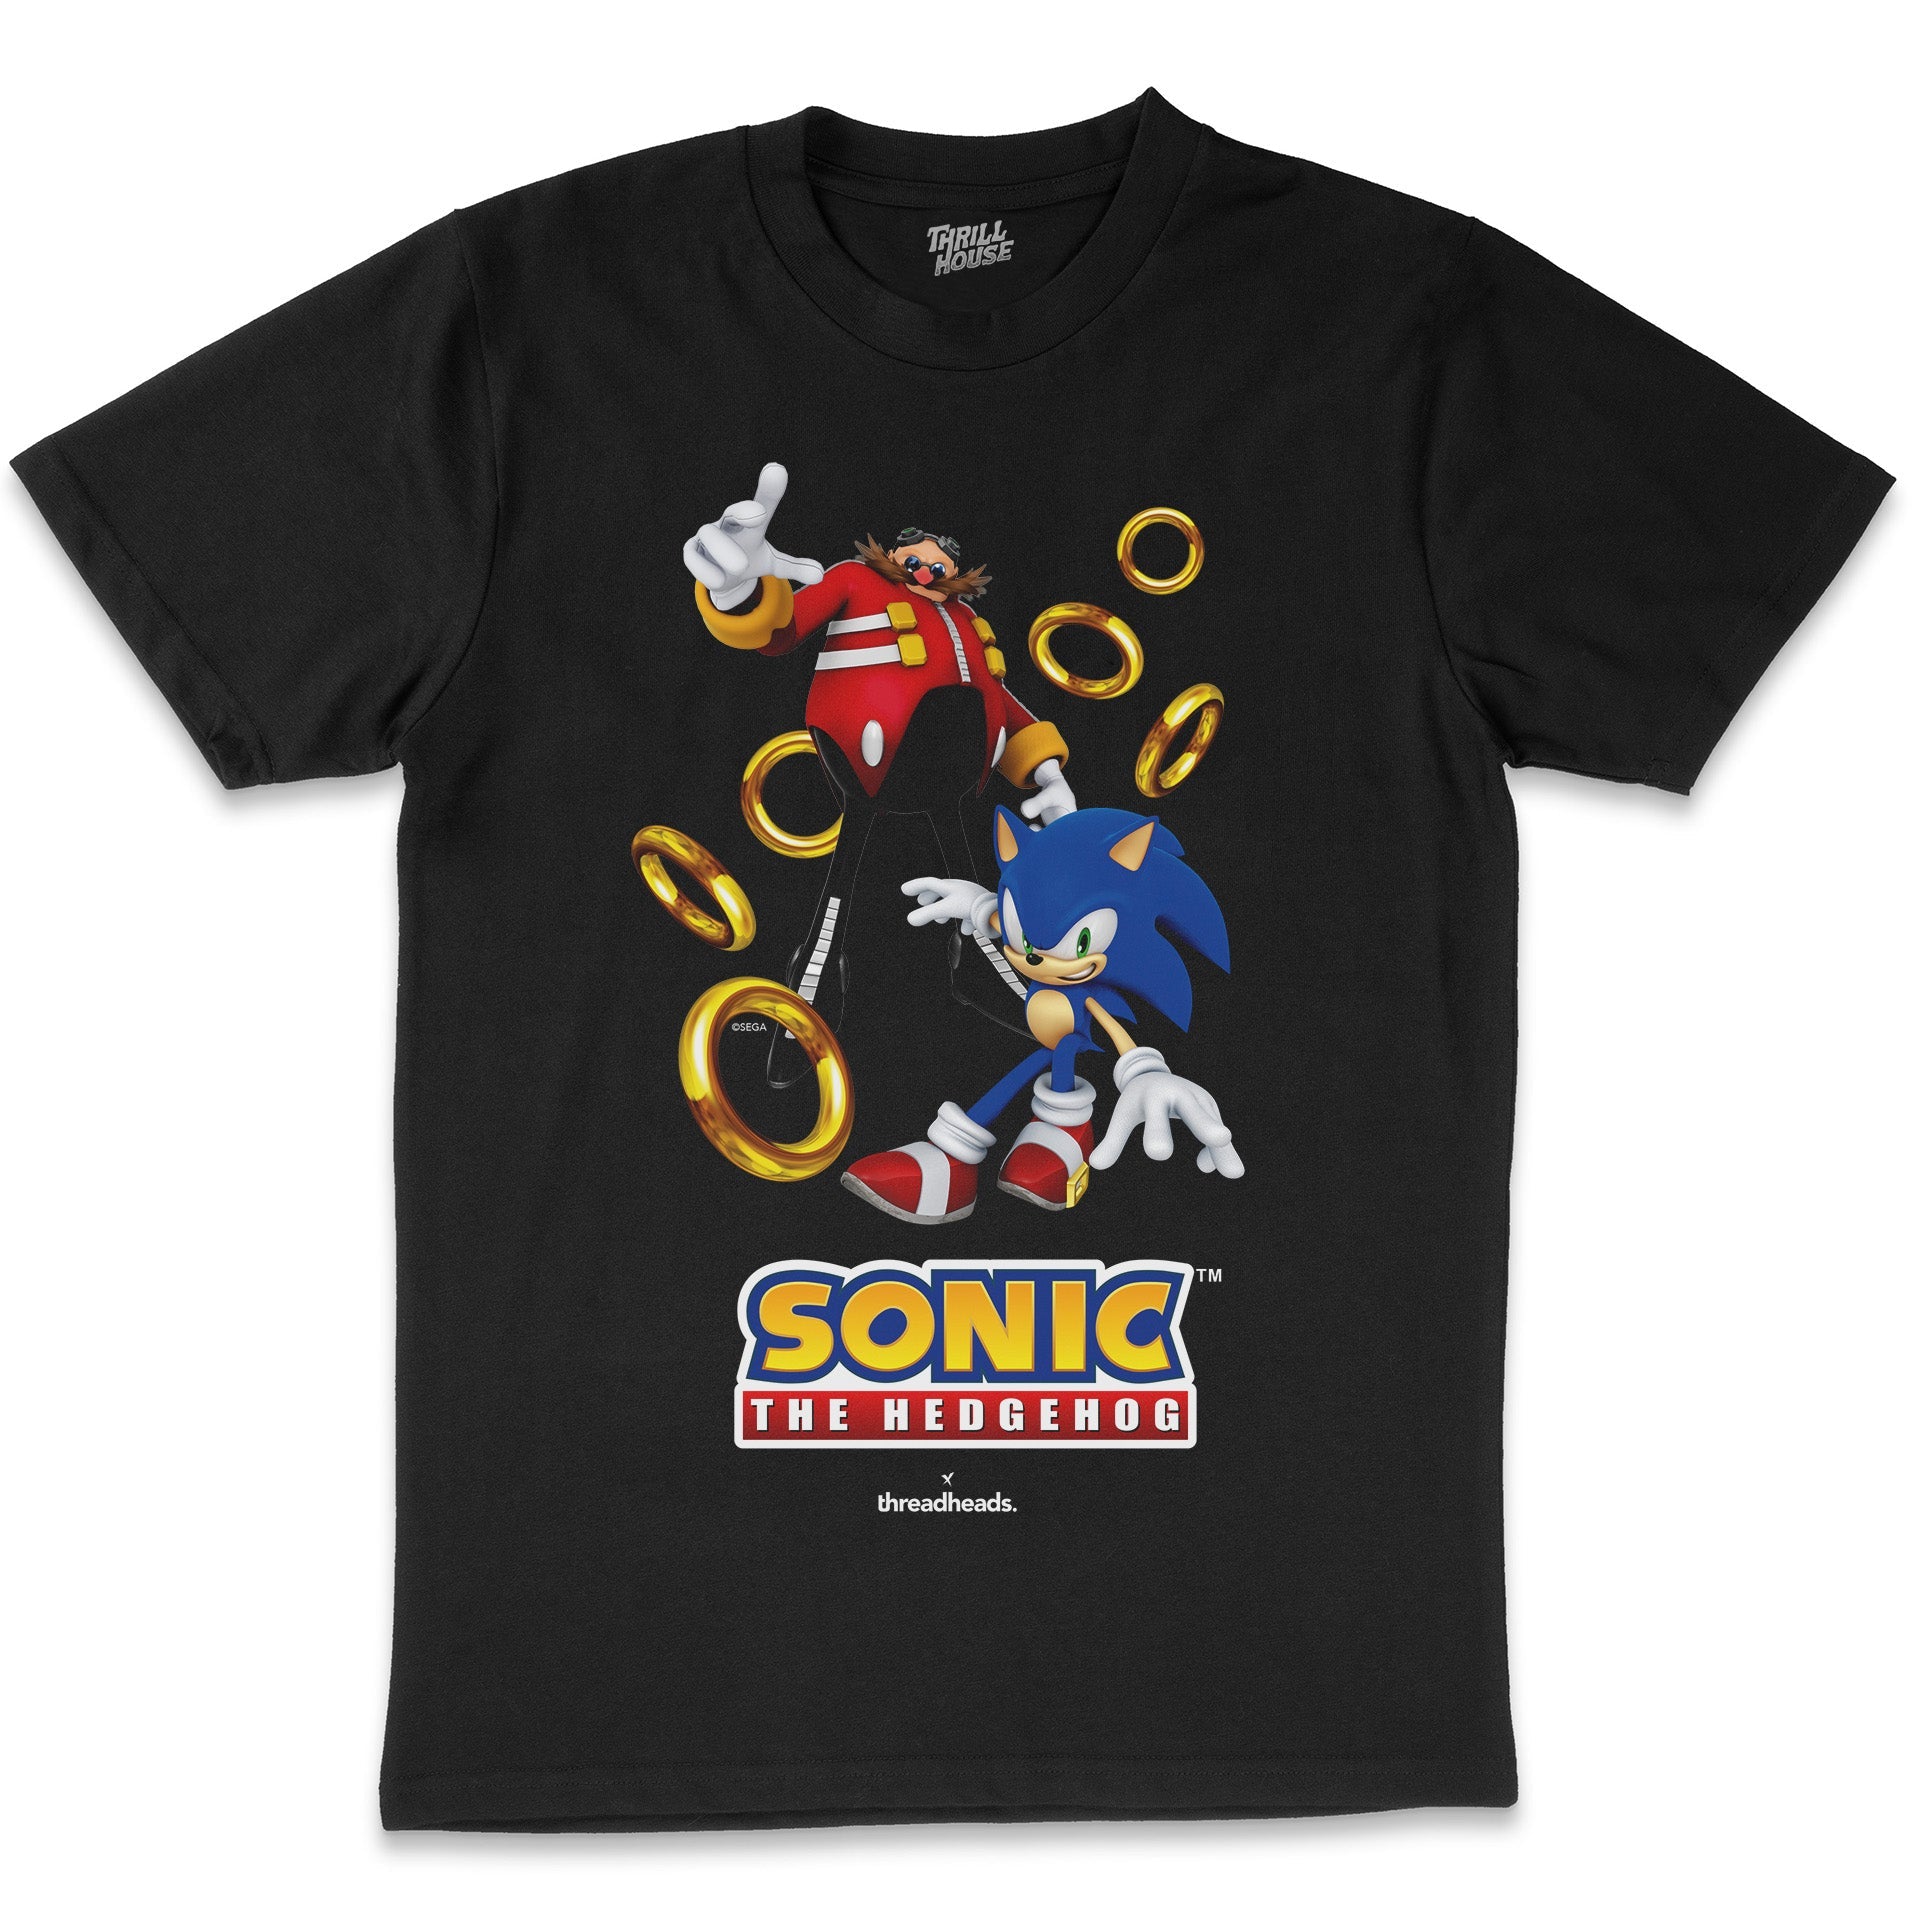 Sonic The Hedgehog Don't Stop Running Retro 90s Video Game Cartridge Console Officially Licensed SEGA T-Shirt